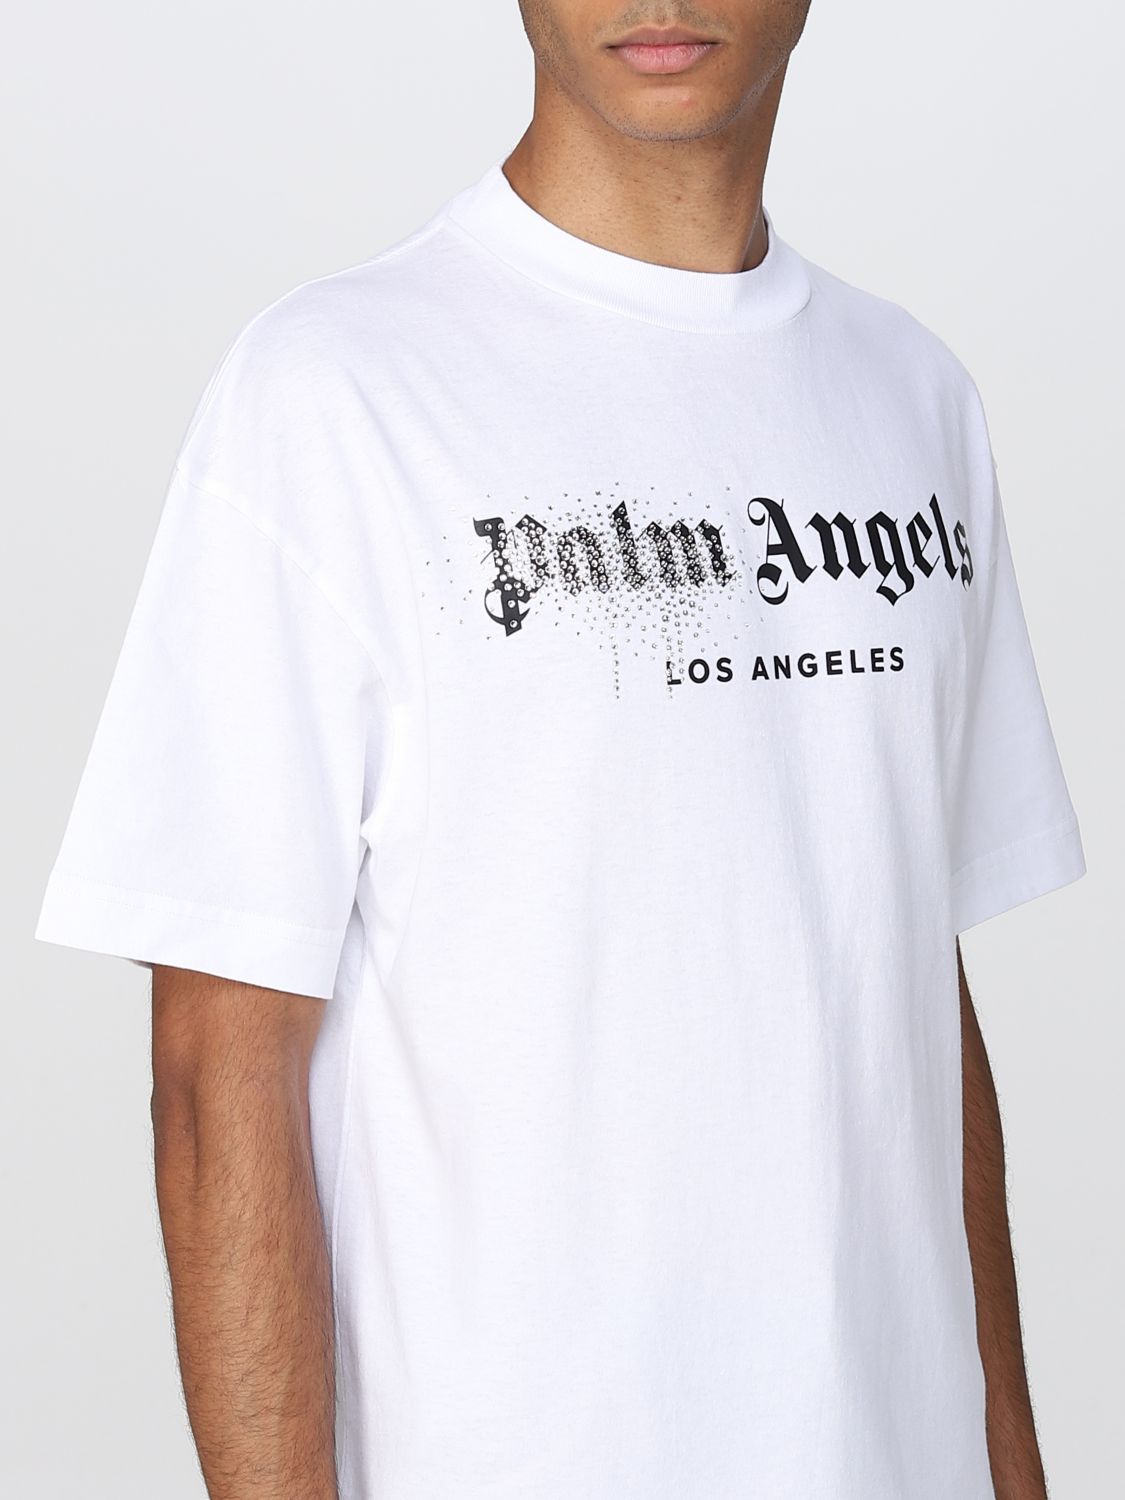 PALM ANGELS: t-shirt for man - White  Palm Angels t-shirt PMAA001F22JER012  online at